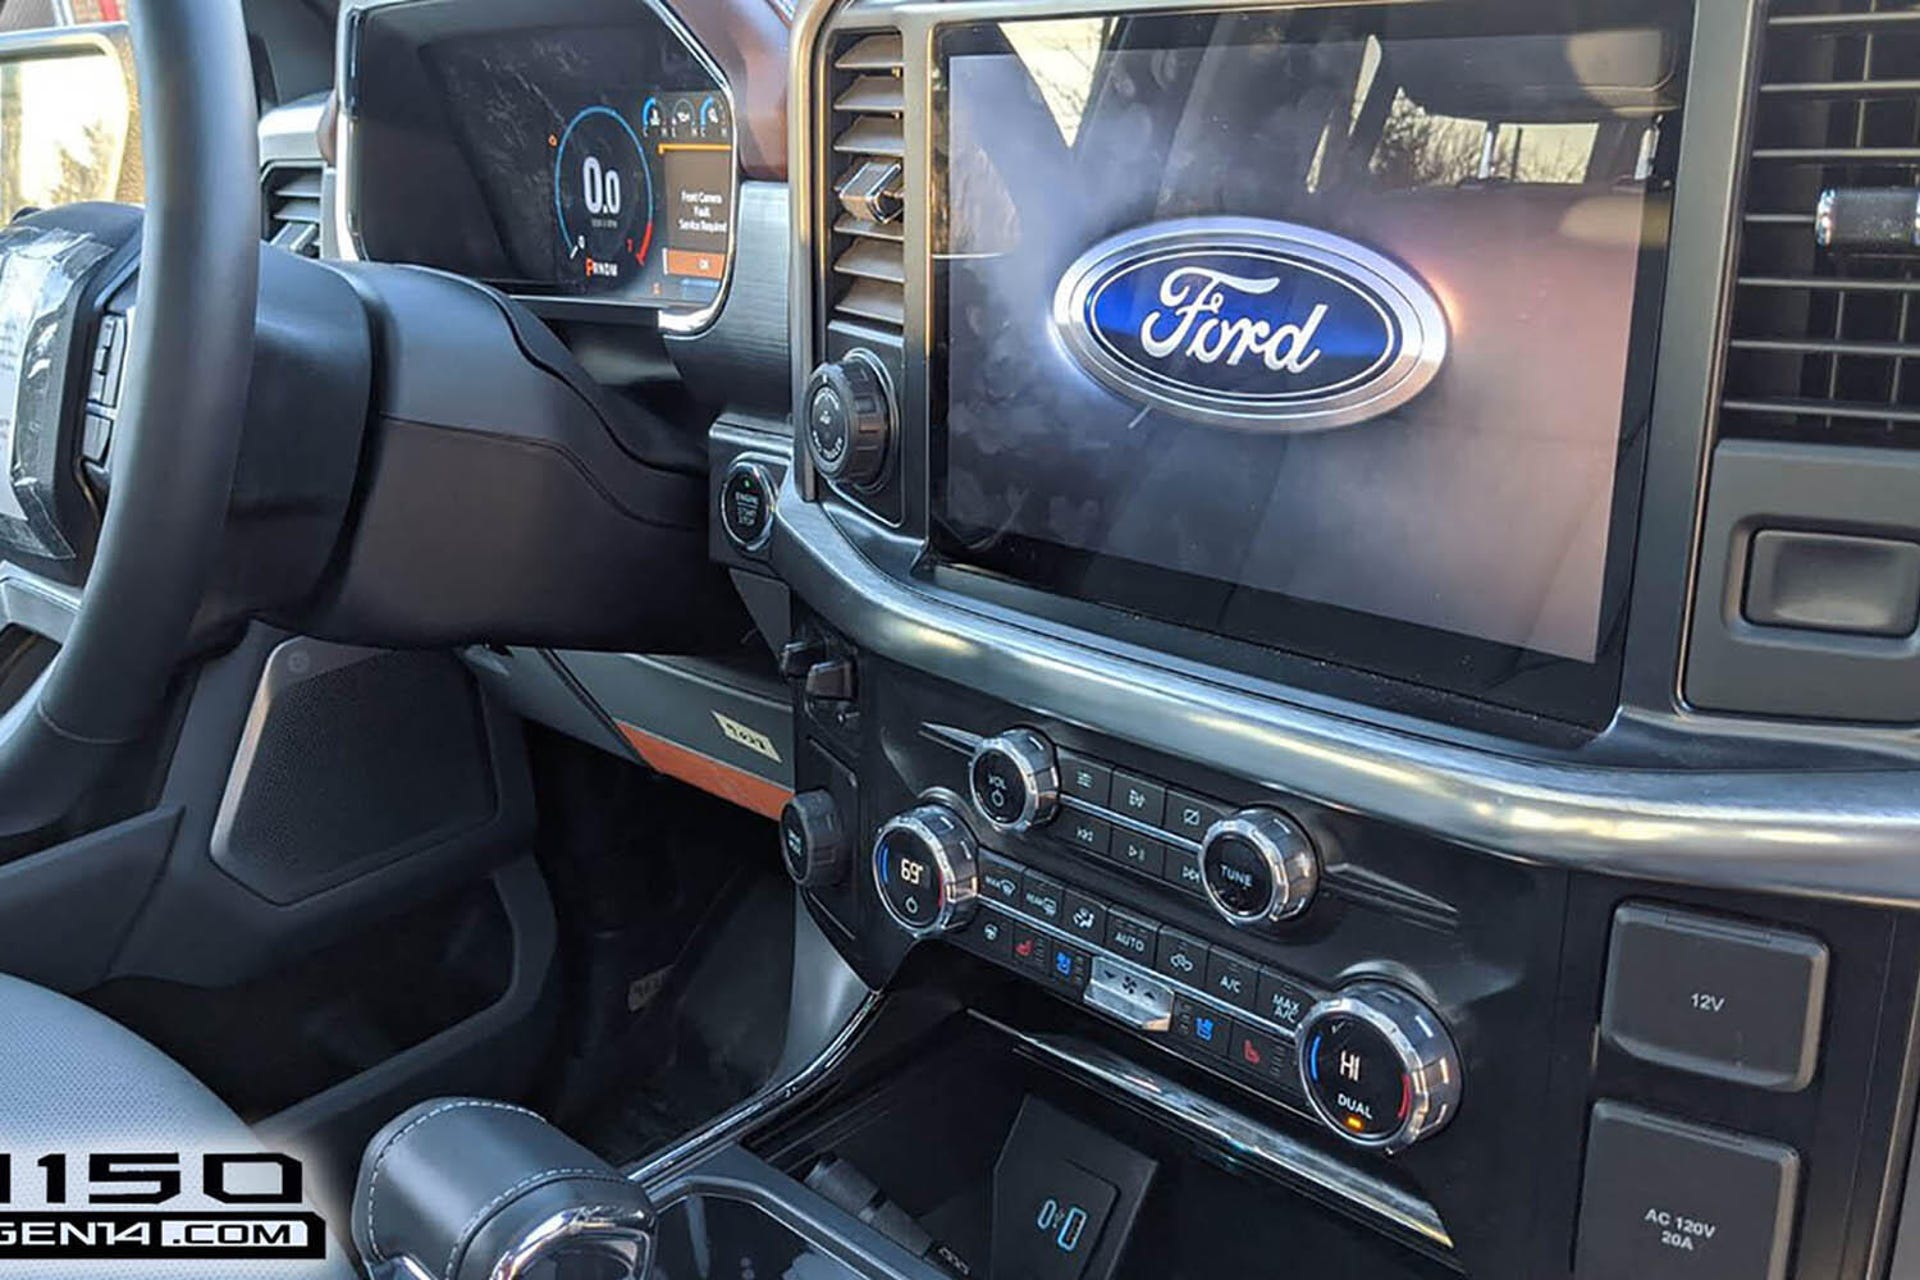 2021 Ford F-150 leaked photo